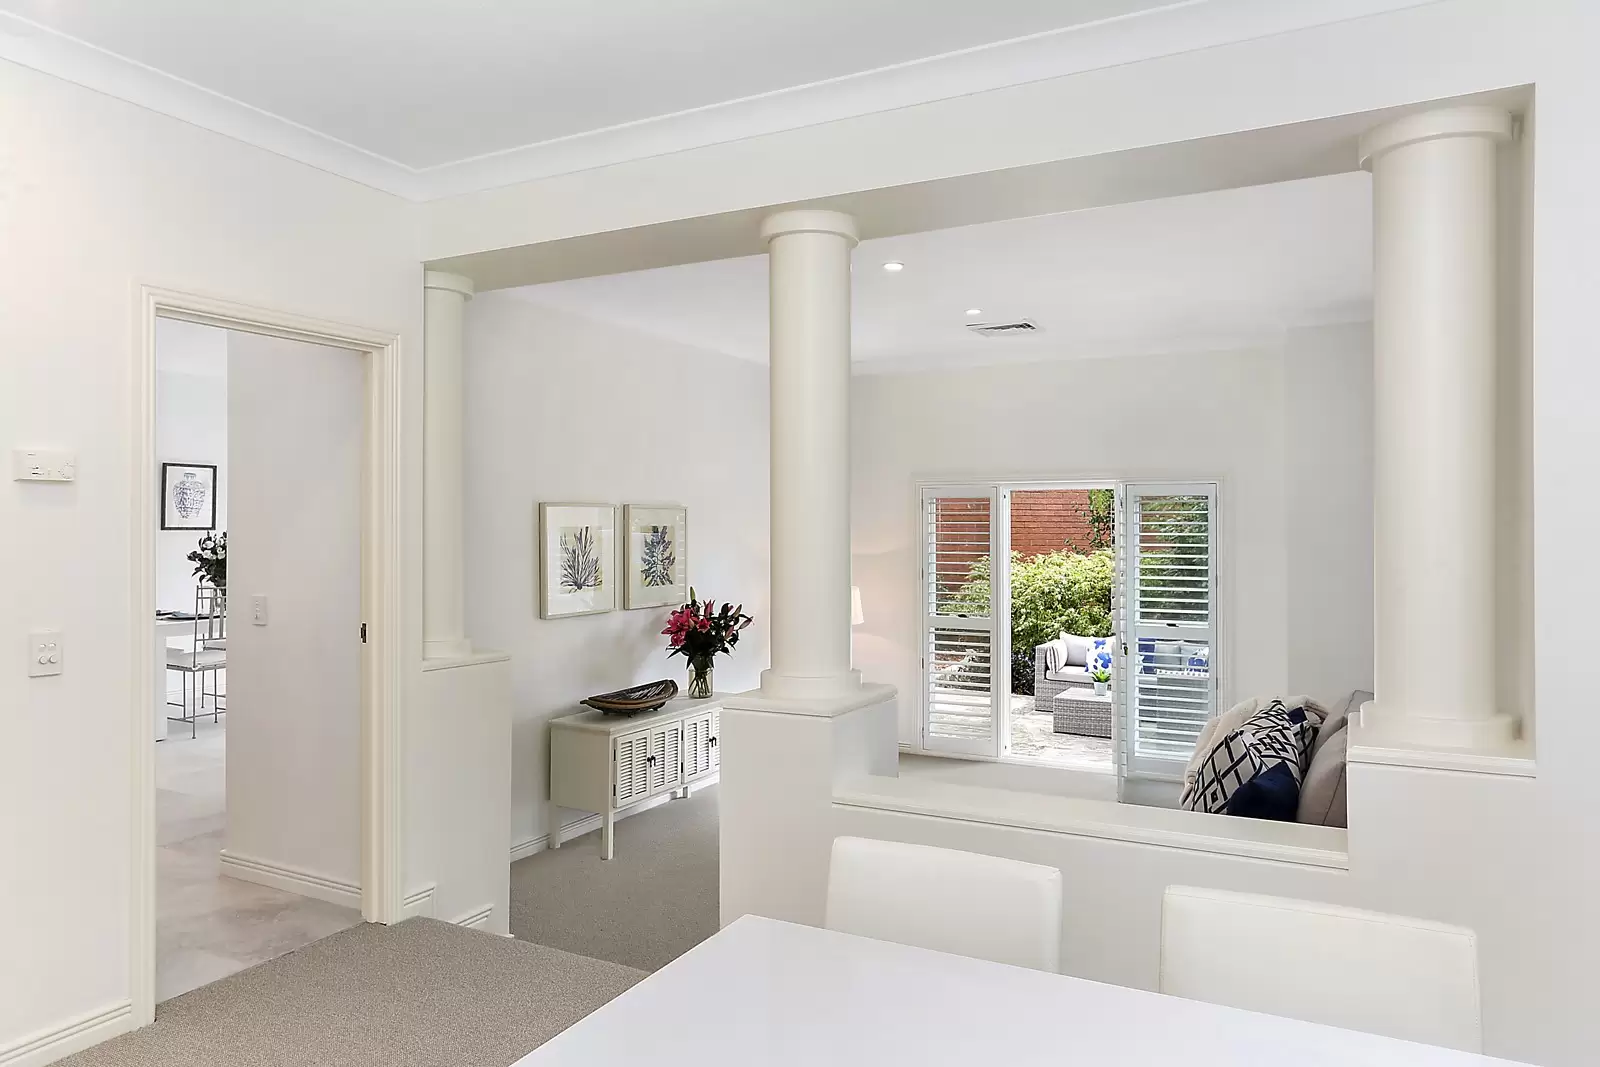 Photo #4: 1 Stanley Close, St Ives - Sold by Sydney Sotheby's International Realty